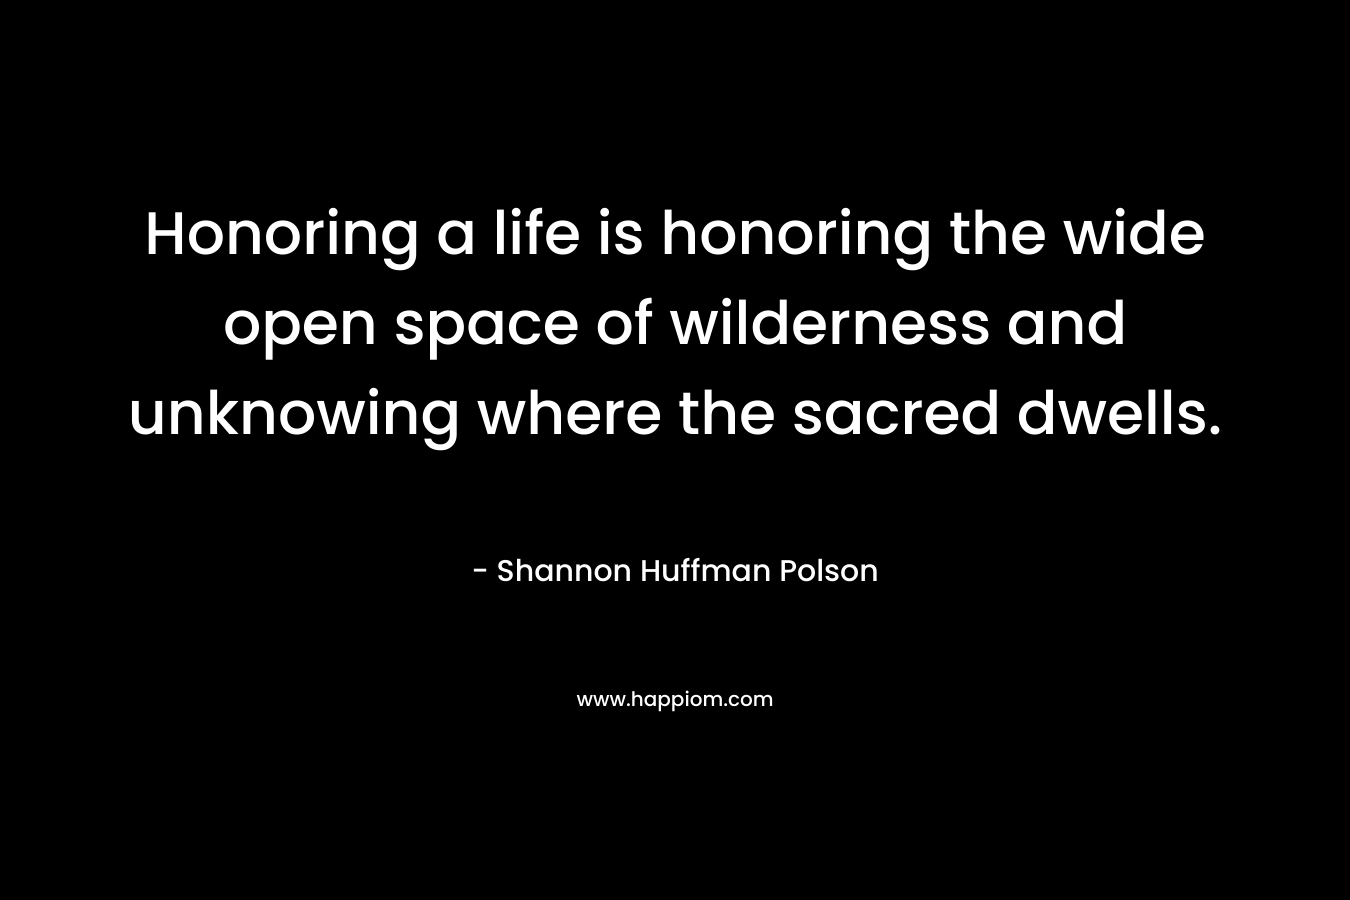 Honoring a life is honoring the wide open space of wilderness and unknowing where the sacred dwells. – Shannon Huffman Polson